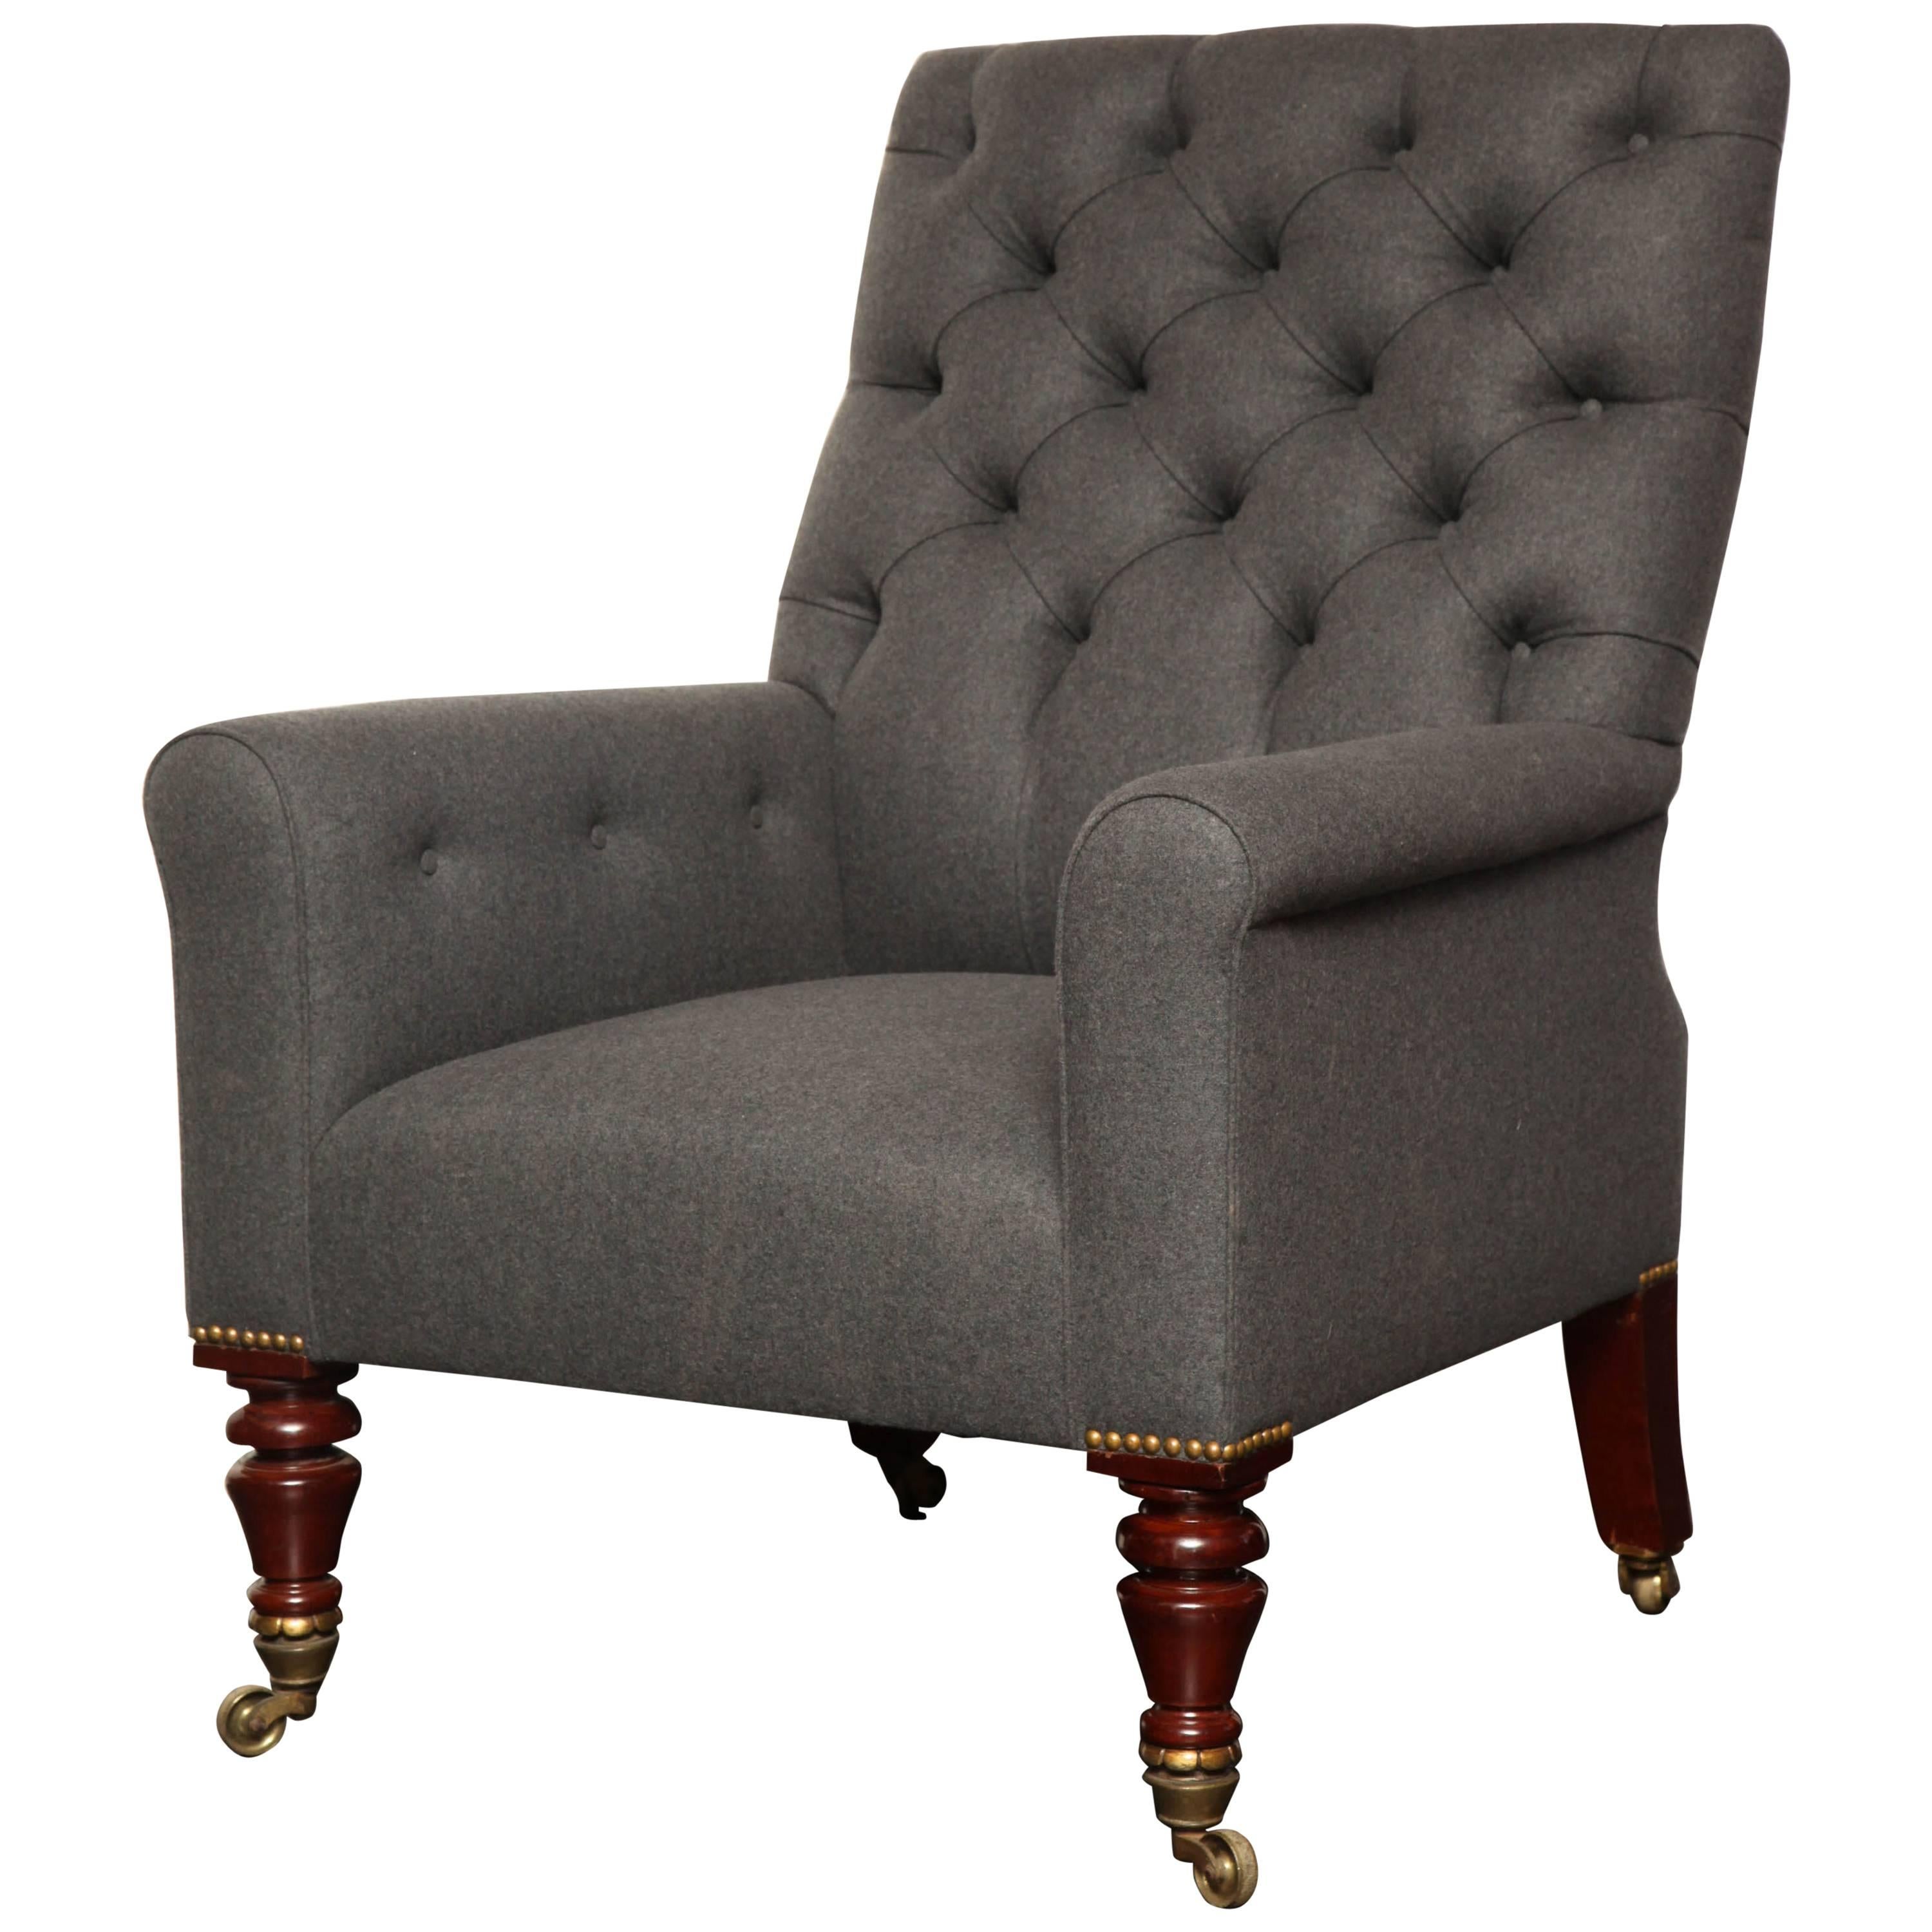 Exceptional 19th Century English, William IV Upholstered Armchair For Sale